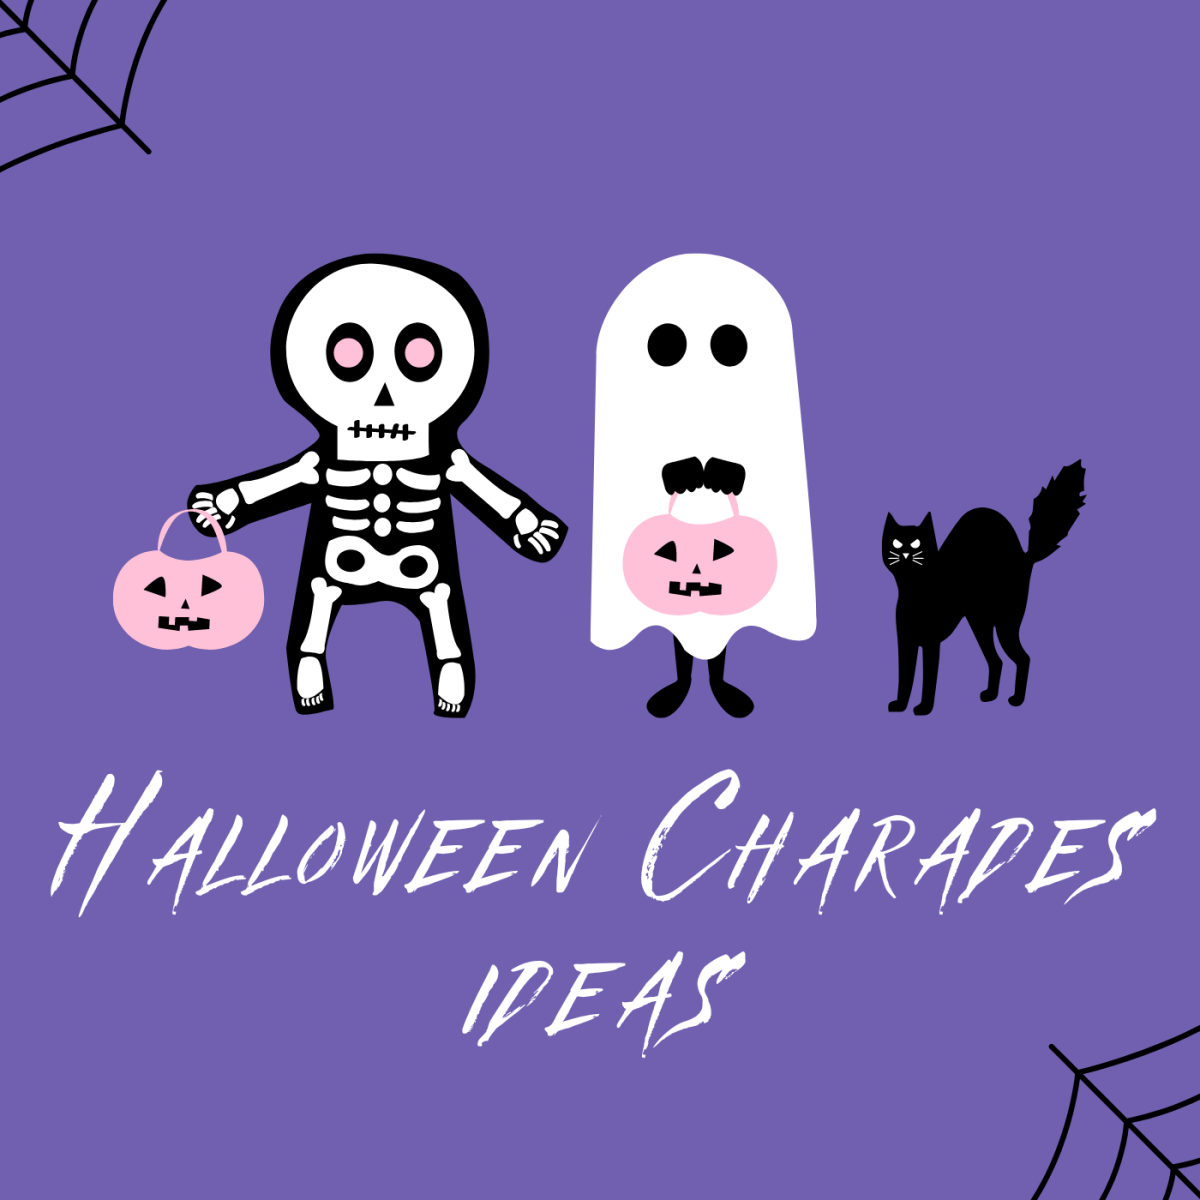 How to Play Halloween Charades